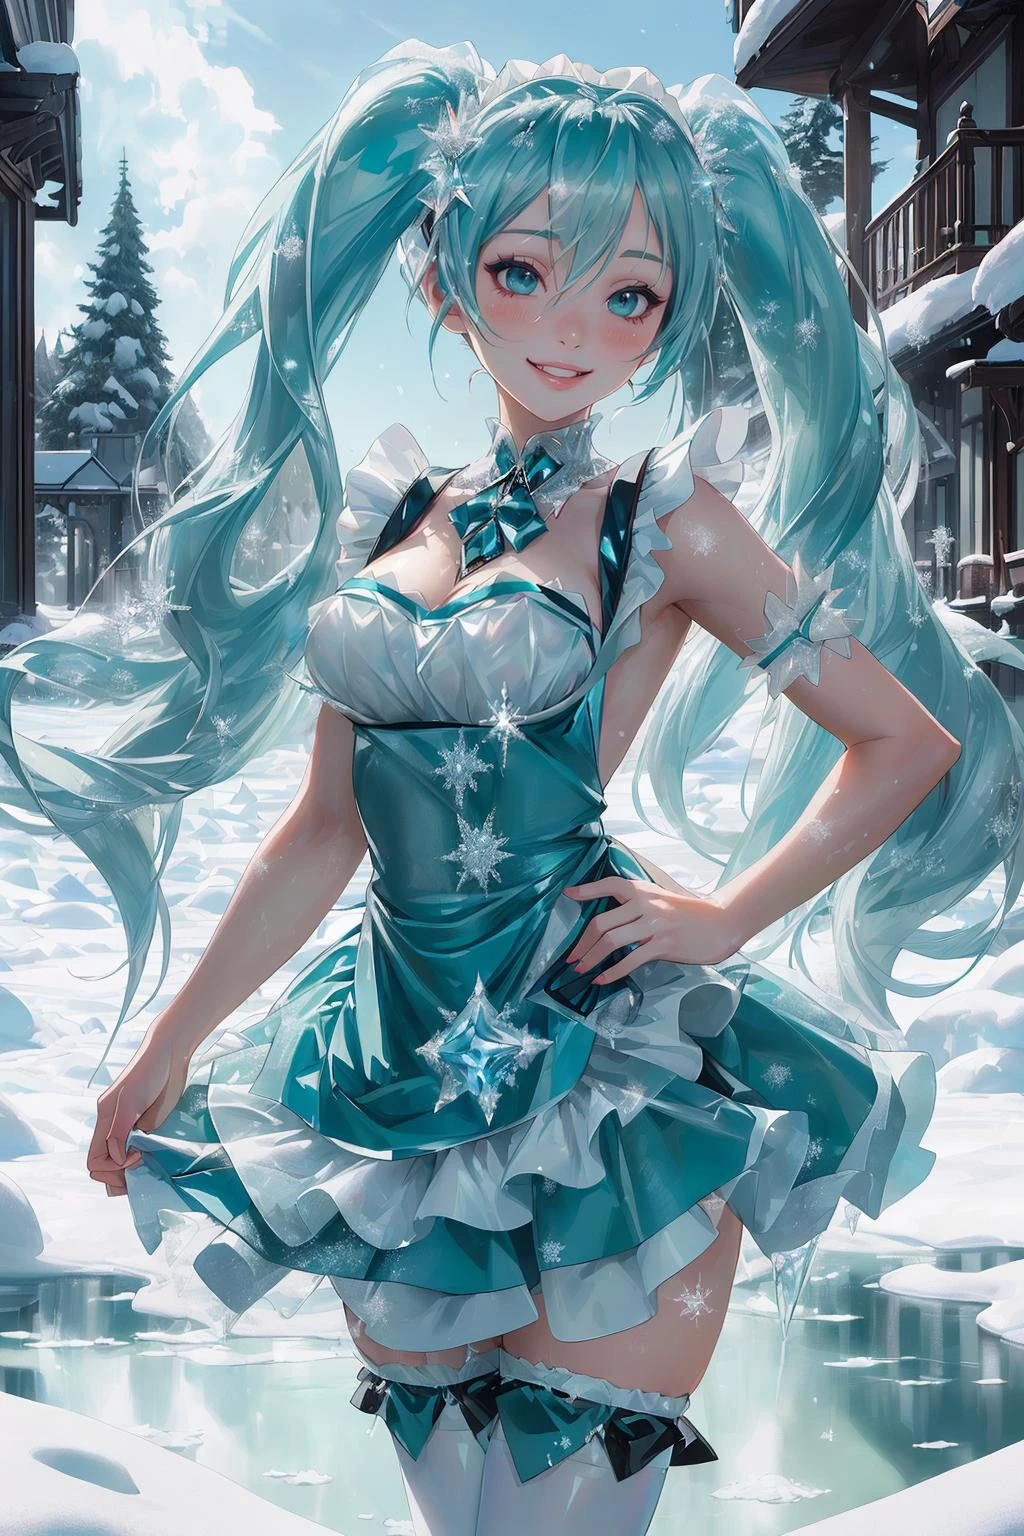 ((Masterpiece, best quality,edgQuality,photorealistic, hyper realistic)),smiling,standing,posing for a picture,
edgApron, edgice, a (Hatsune Miku, aqua hair, twin tails) in a apron,ice,snow flakes ,wearing edgice edgApron
 